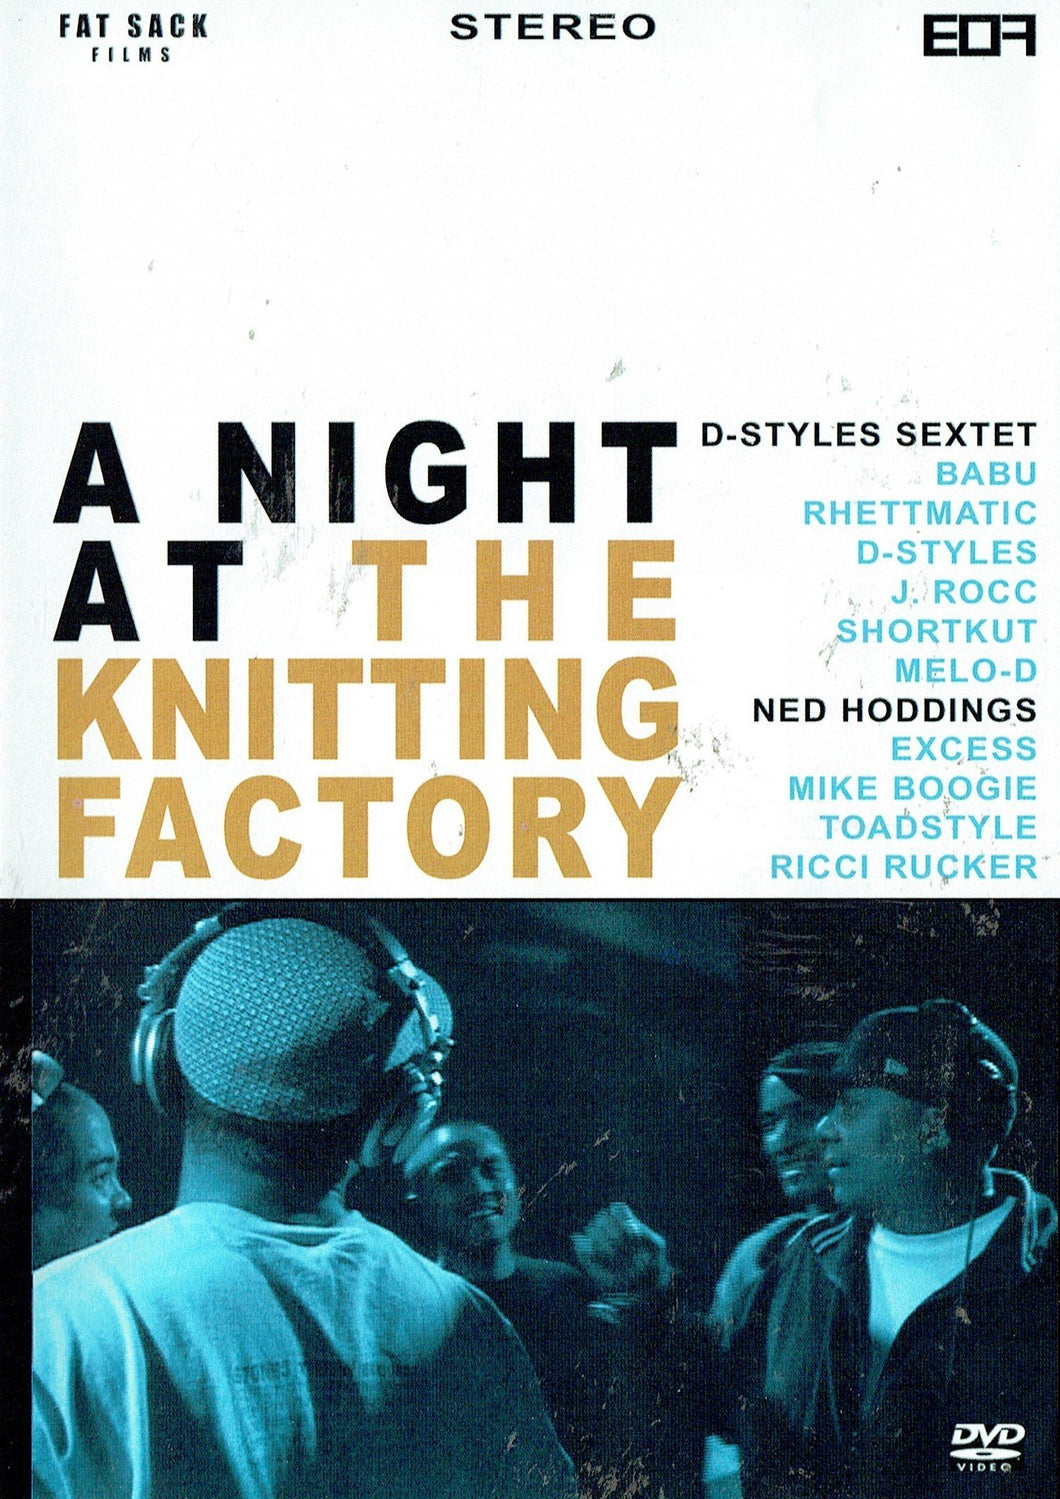 D-STYLES SEXTET-A NIGHT AT THE KNITTING FACTORY